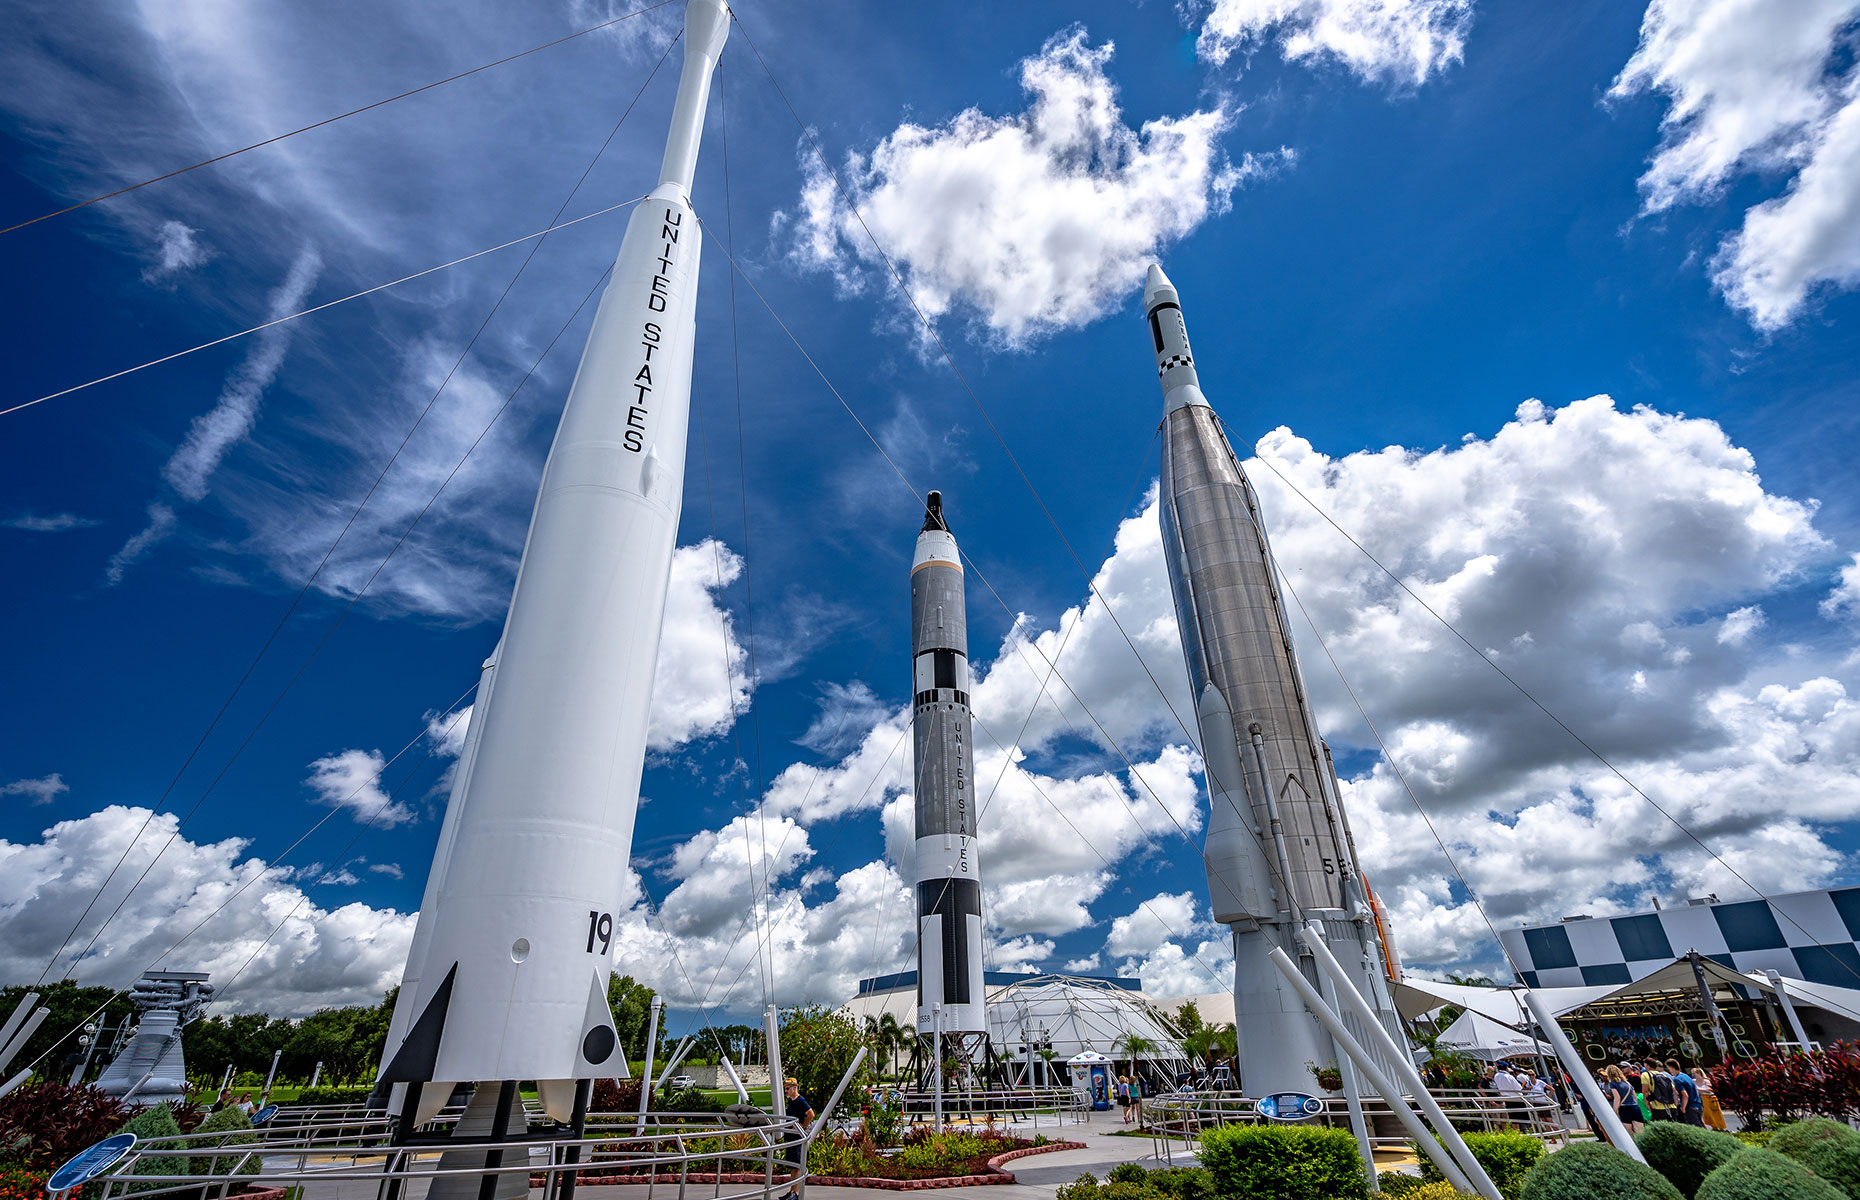 Kennedy Space Center (Image: Alex Cimbal/Shutterstock)